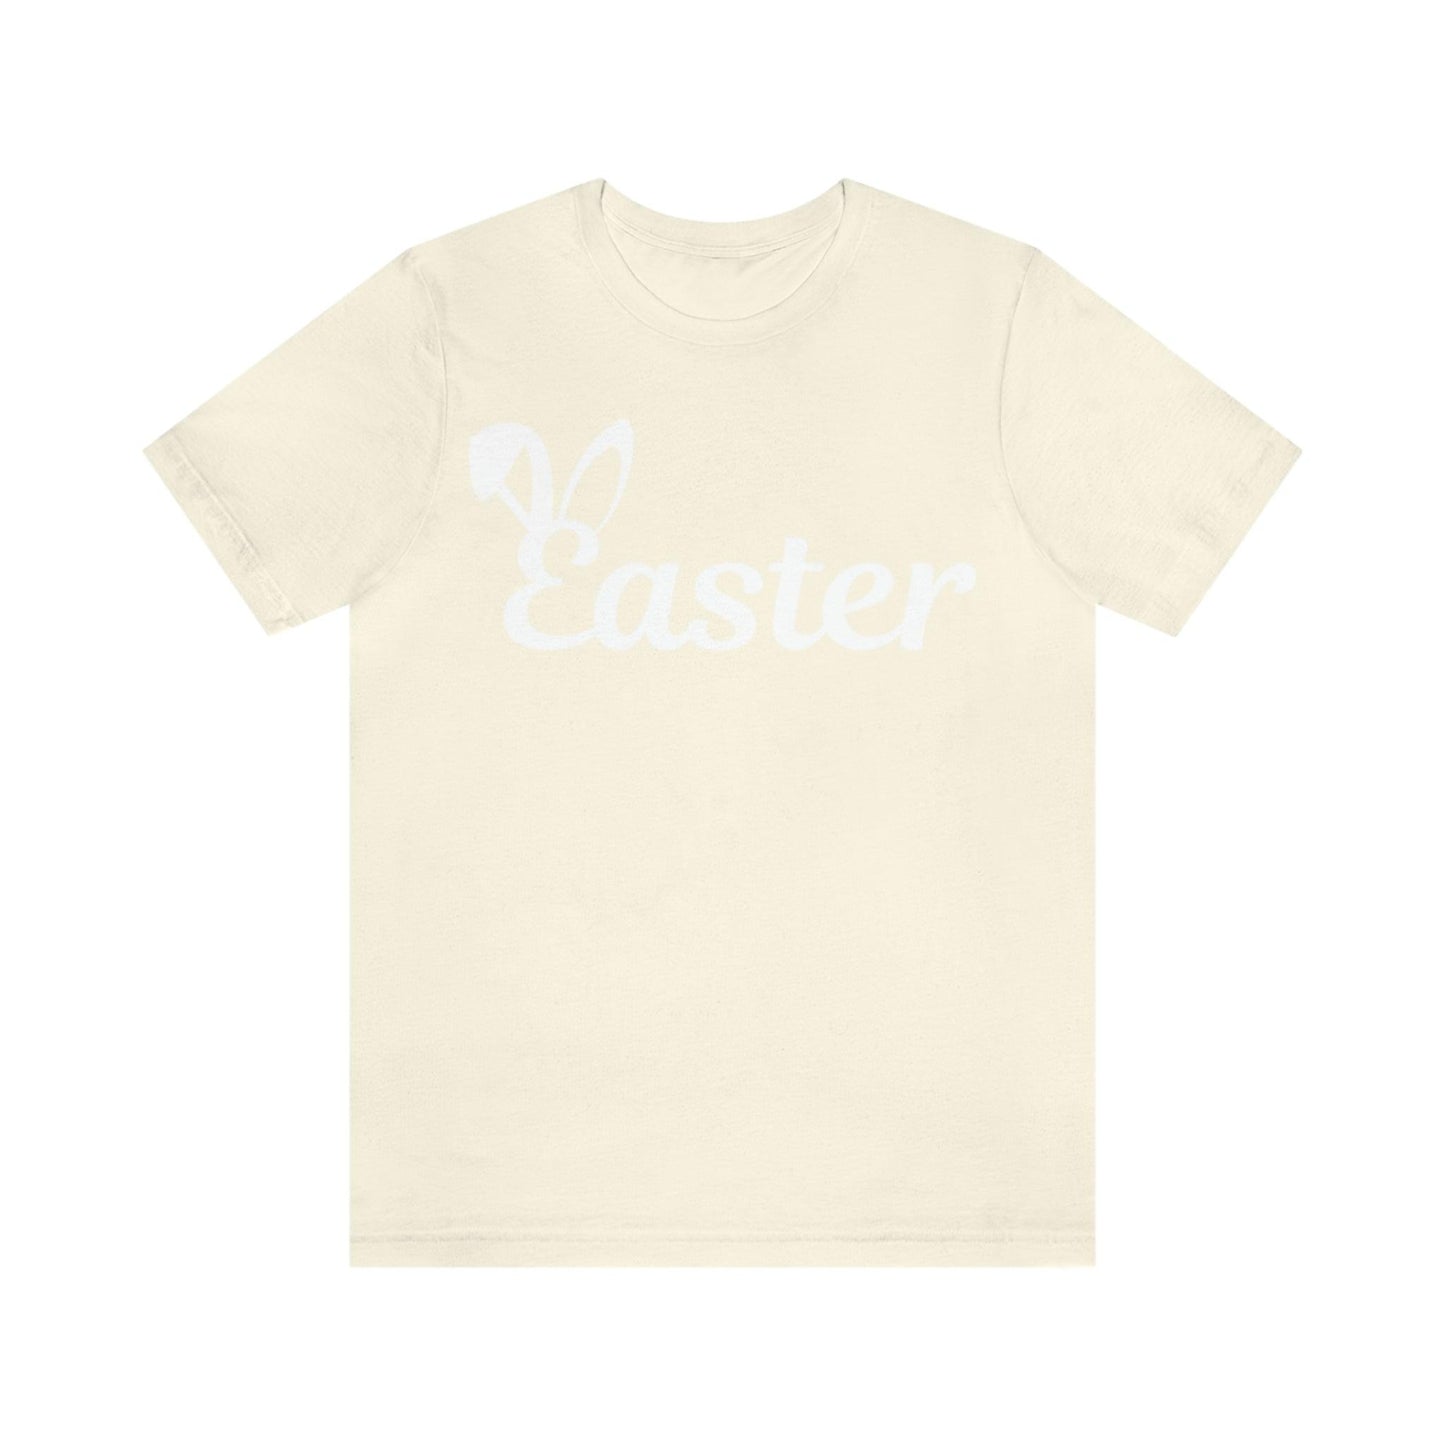 Funny Easter T shirt, Cute Easter Shirt for women and men